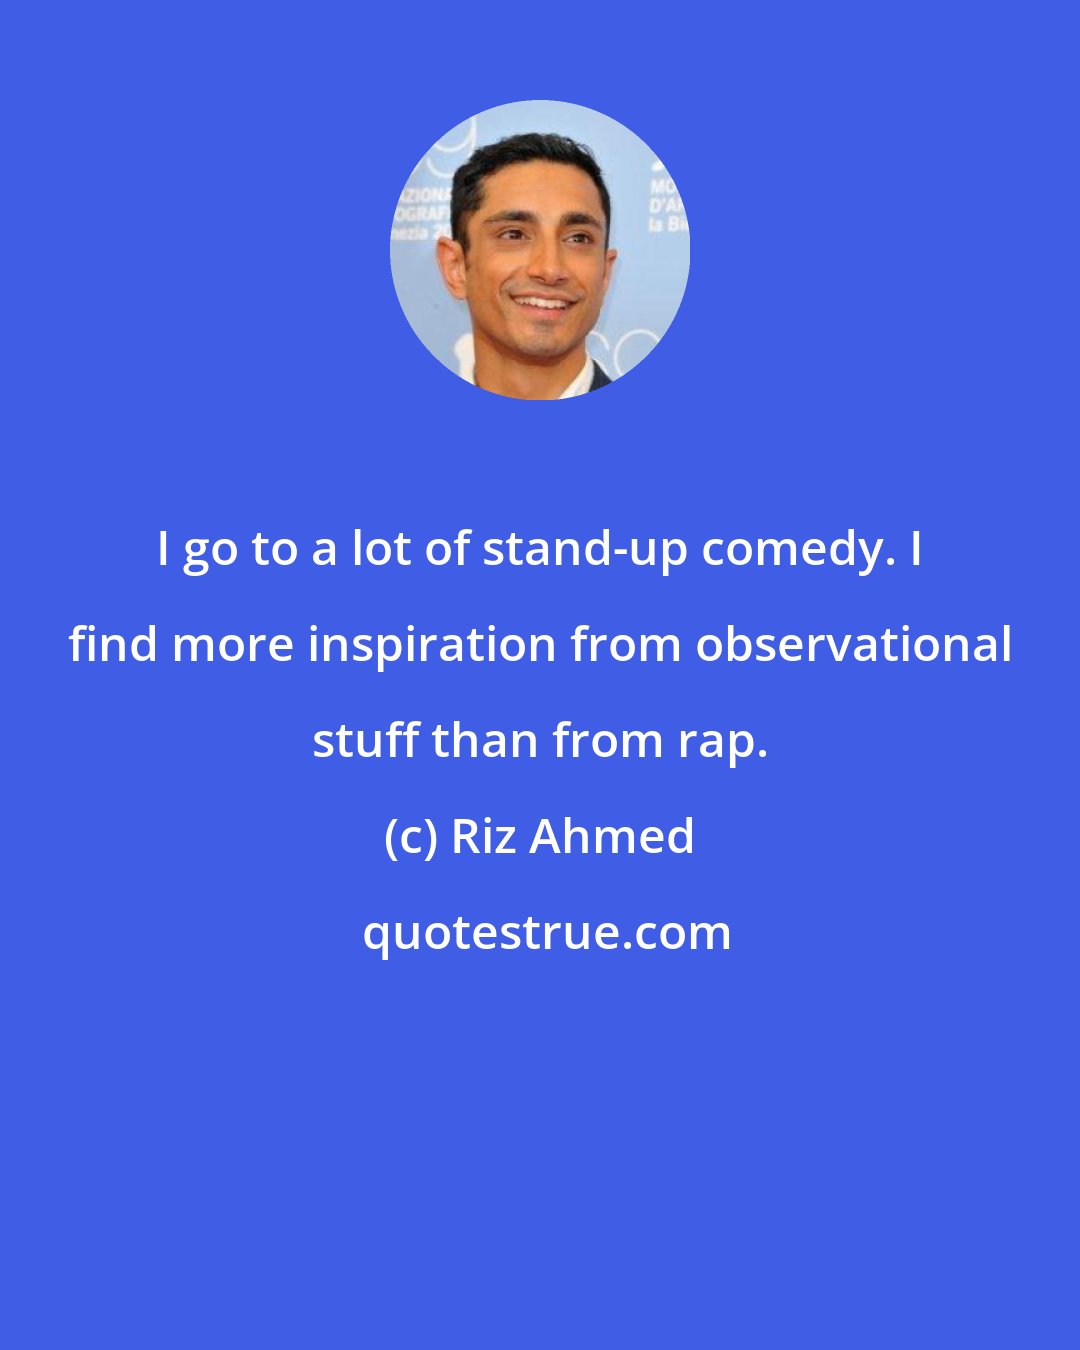 Riz Ahmed: I go to a lot of stand-up comedy. I find more inspiration from observational stuff than from rap.